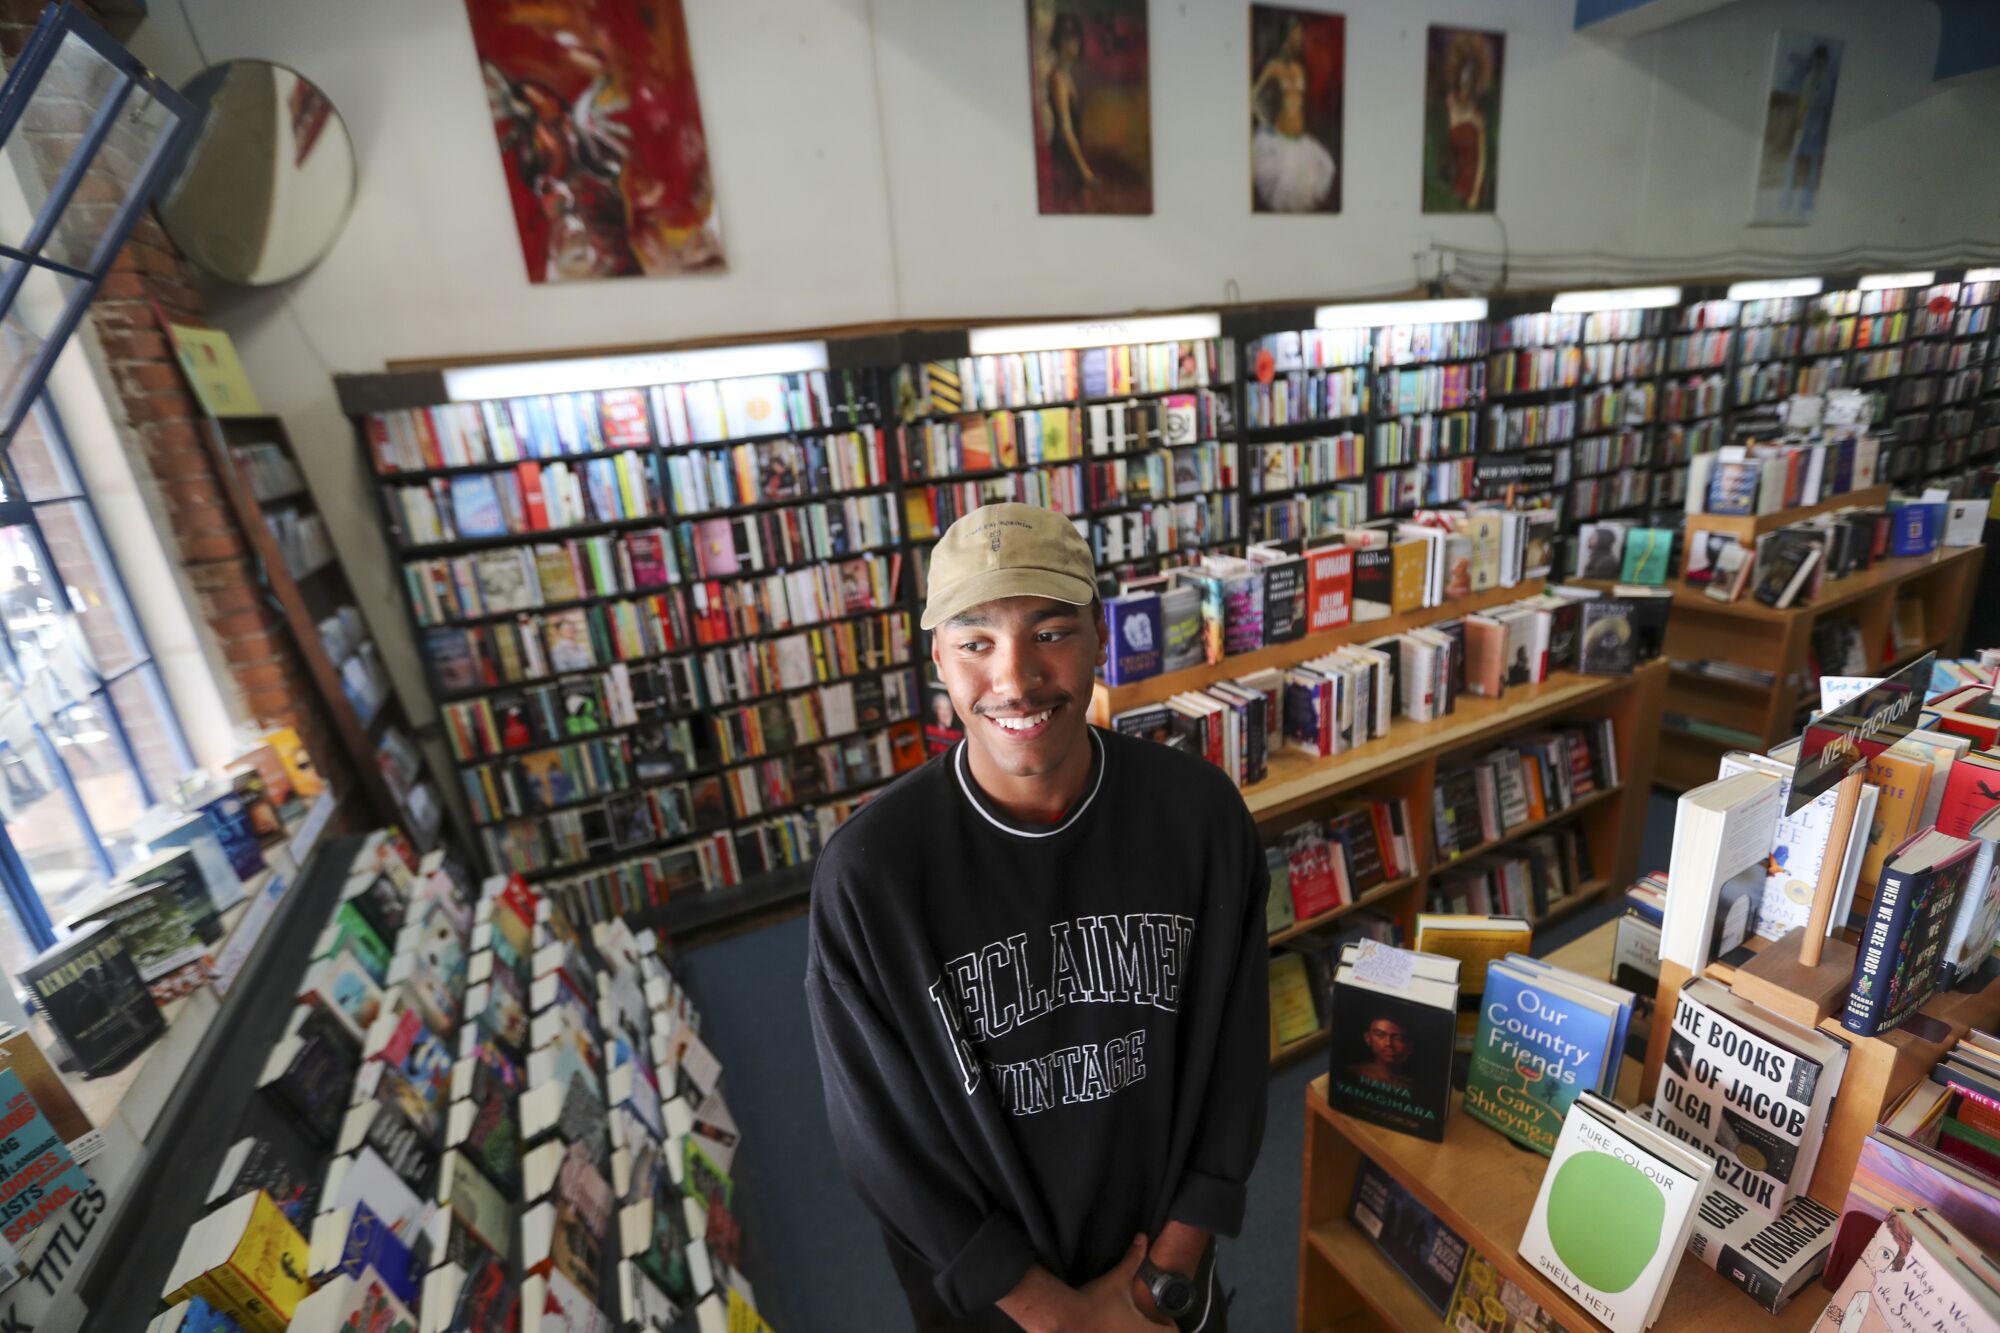 A man wearing a beige hat and black sweatshirt in a bookstore.